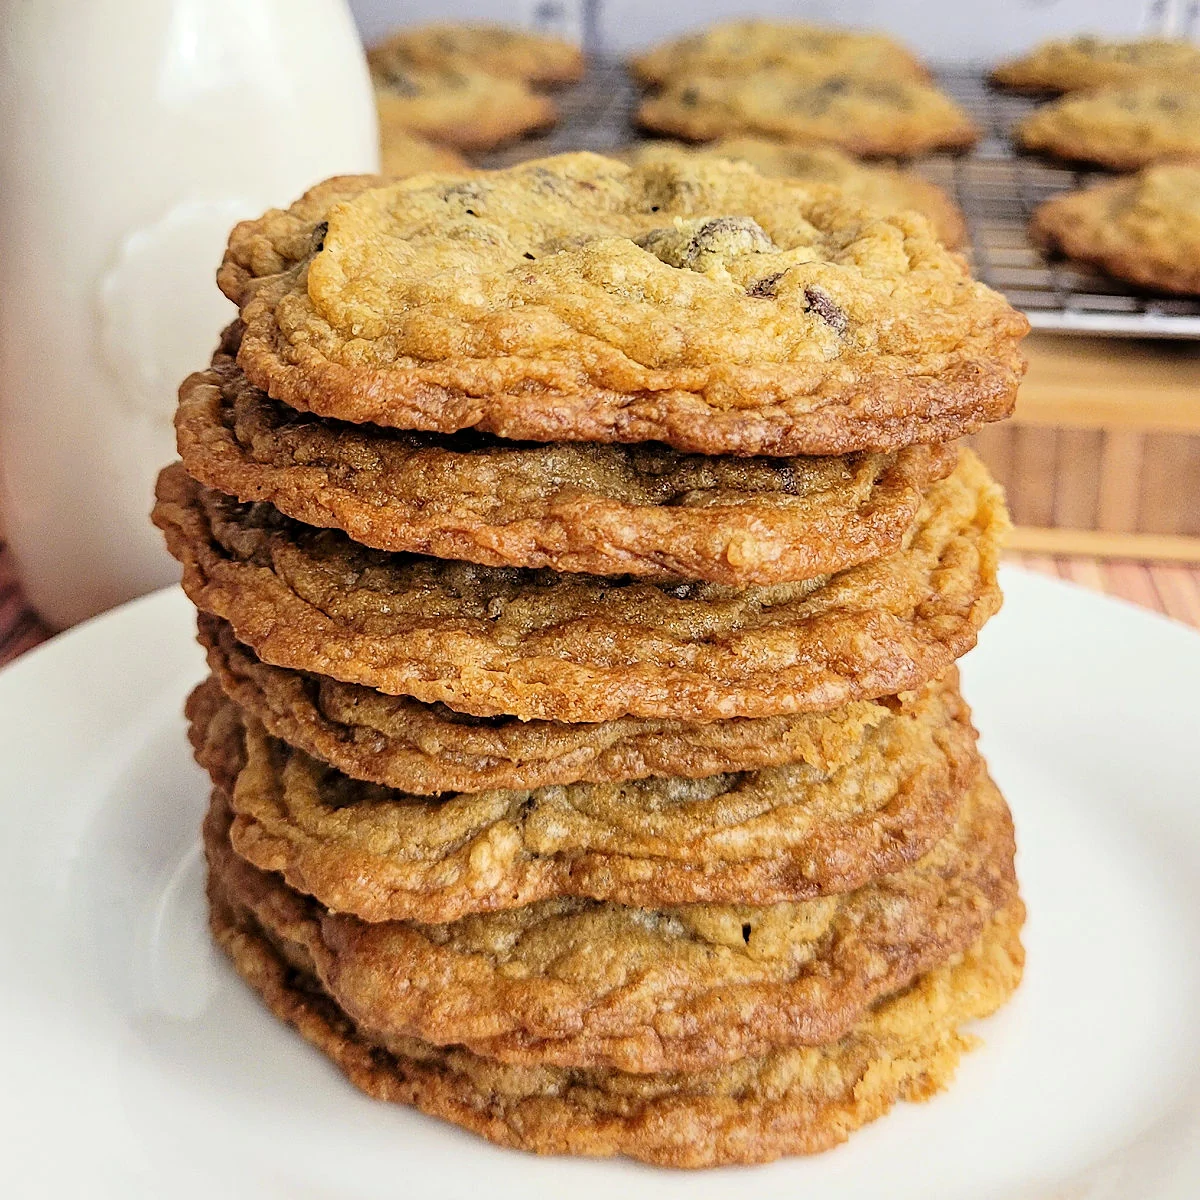 Stack of 7 gluten free chocolate chip cookies on a white dessert plate with a glass of milk.